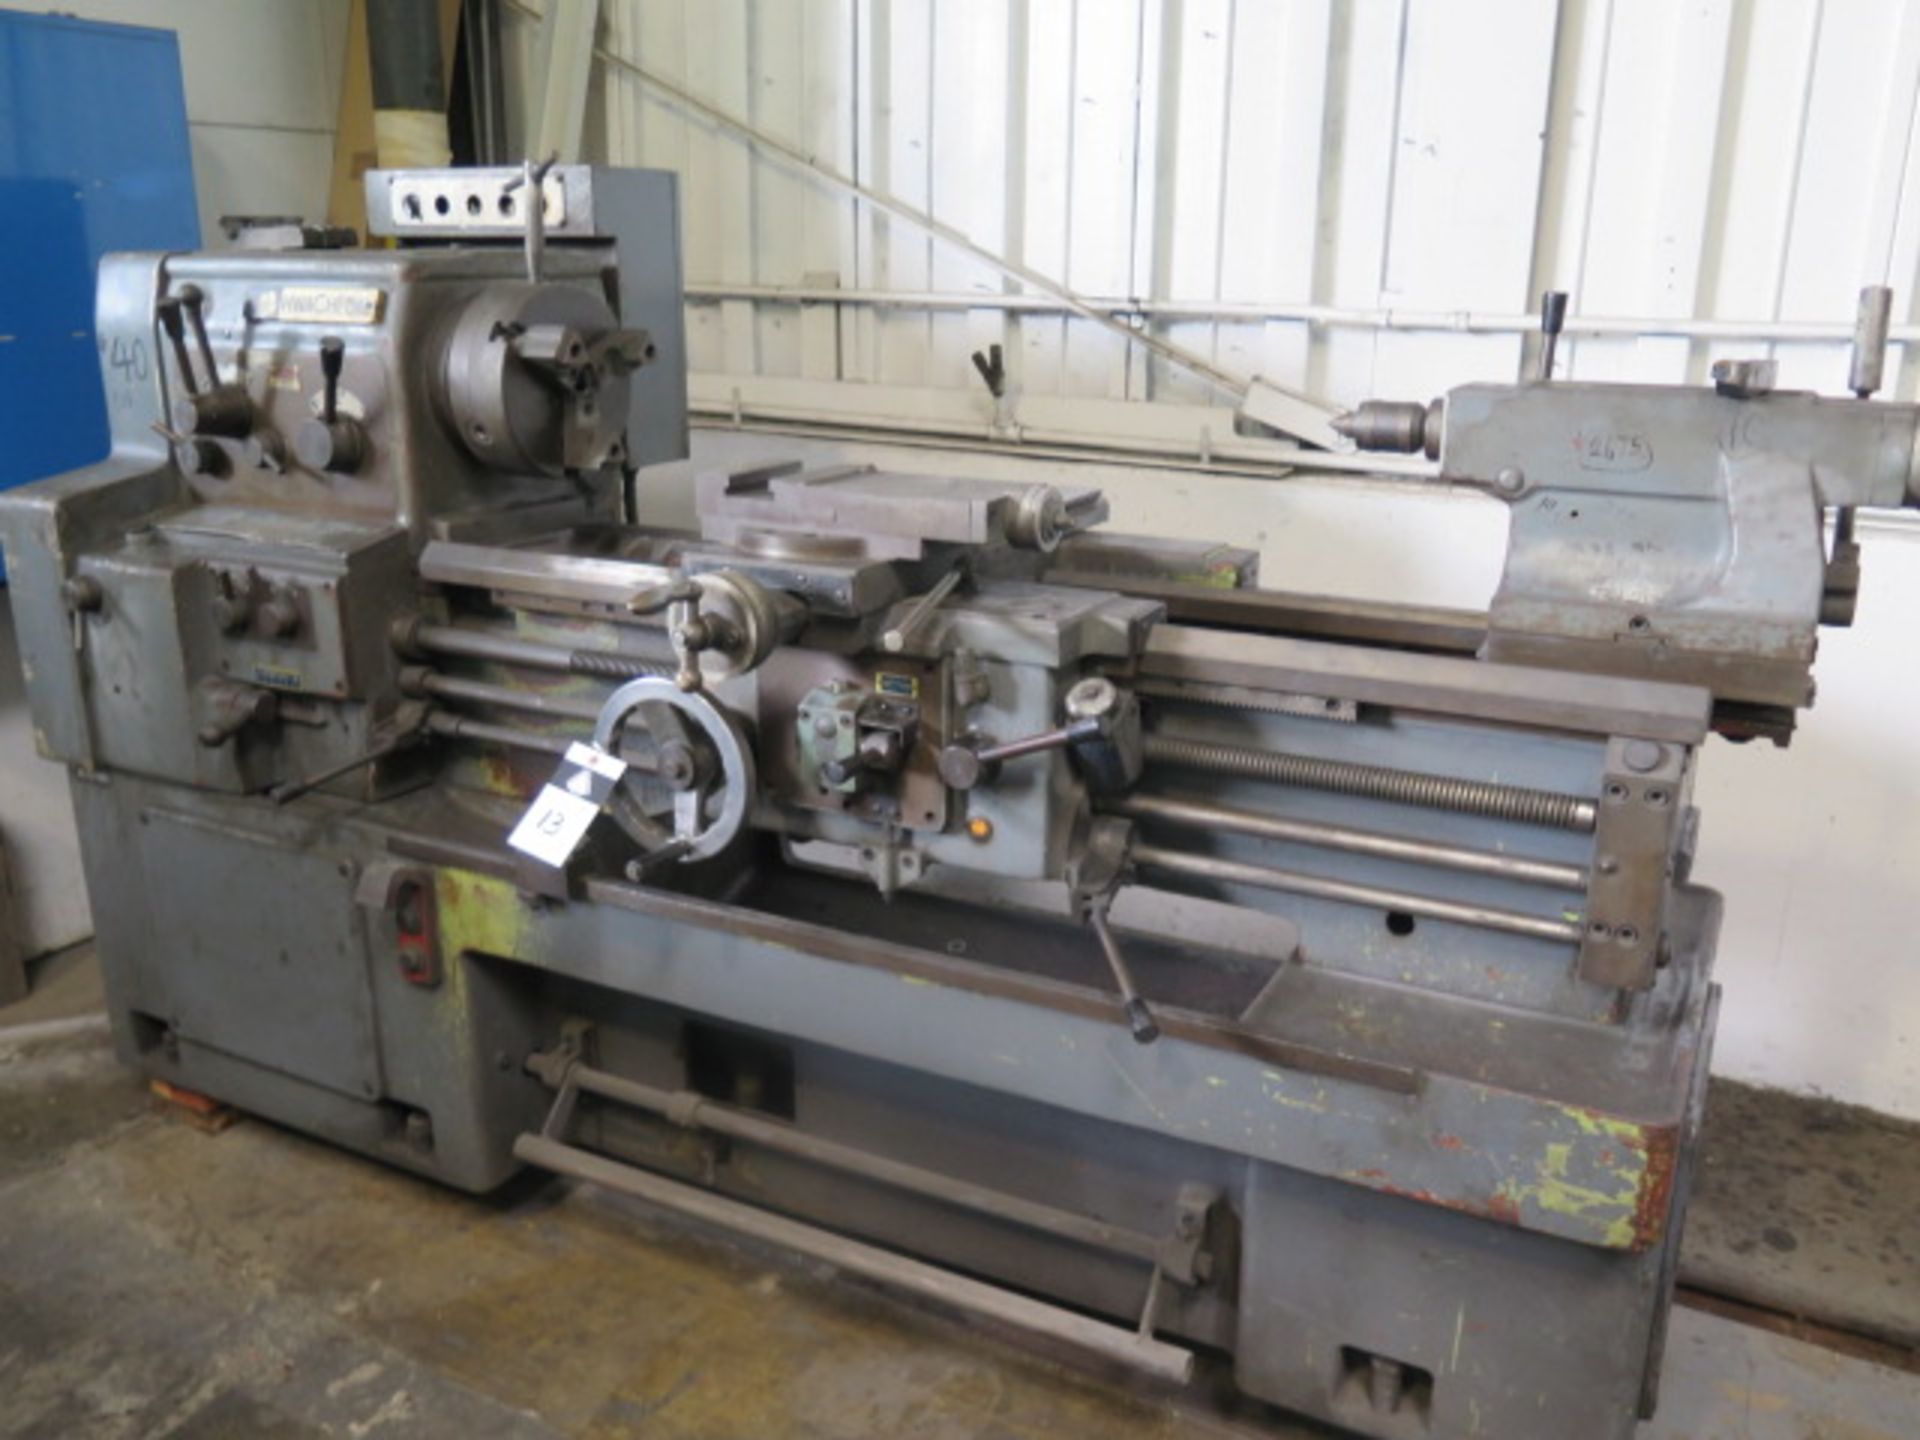 Hwa Cheon 17”GX40 17” x 40” Geared Head Gap Bed Lathe w/ 32-1800 RPM, Inch Threading, SOLD AS IS - Image 3 of 16